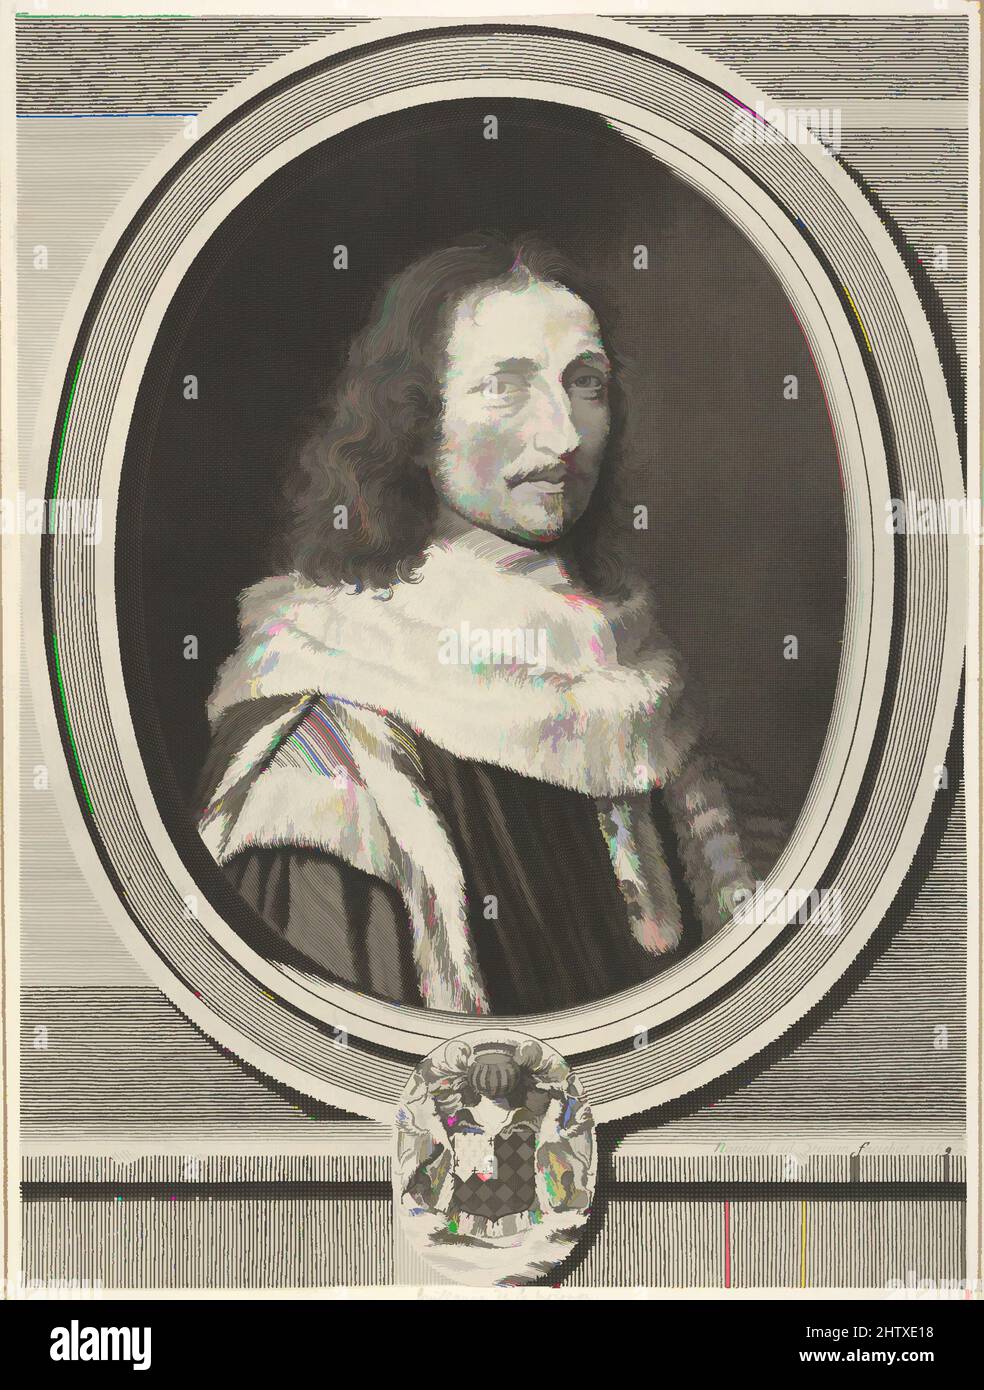 Art inspired by Guillaume de Lamoignon, 1659, Engraving; first state of two (Petitjean & Wickert), sheet: 12 3/8 x 9 1/4 in. (31.5 x 23.5 cm), Prints, Robert Nanteuil (French, Reims 1623–1678 Paris, Classic works modernized by Artotop with a splash of modernity. Shapes, color and value, eye-catching visual impact on art. Emotions through freedom of artworks in a contemporary way. A timeless message pursuing a wildly creative new direction. Artists turning to the digital medium and creating the Artotop NFT Stock Photo